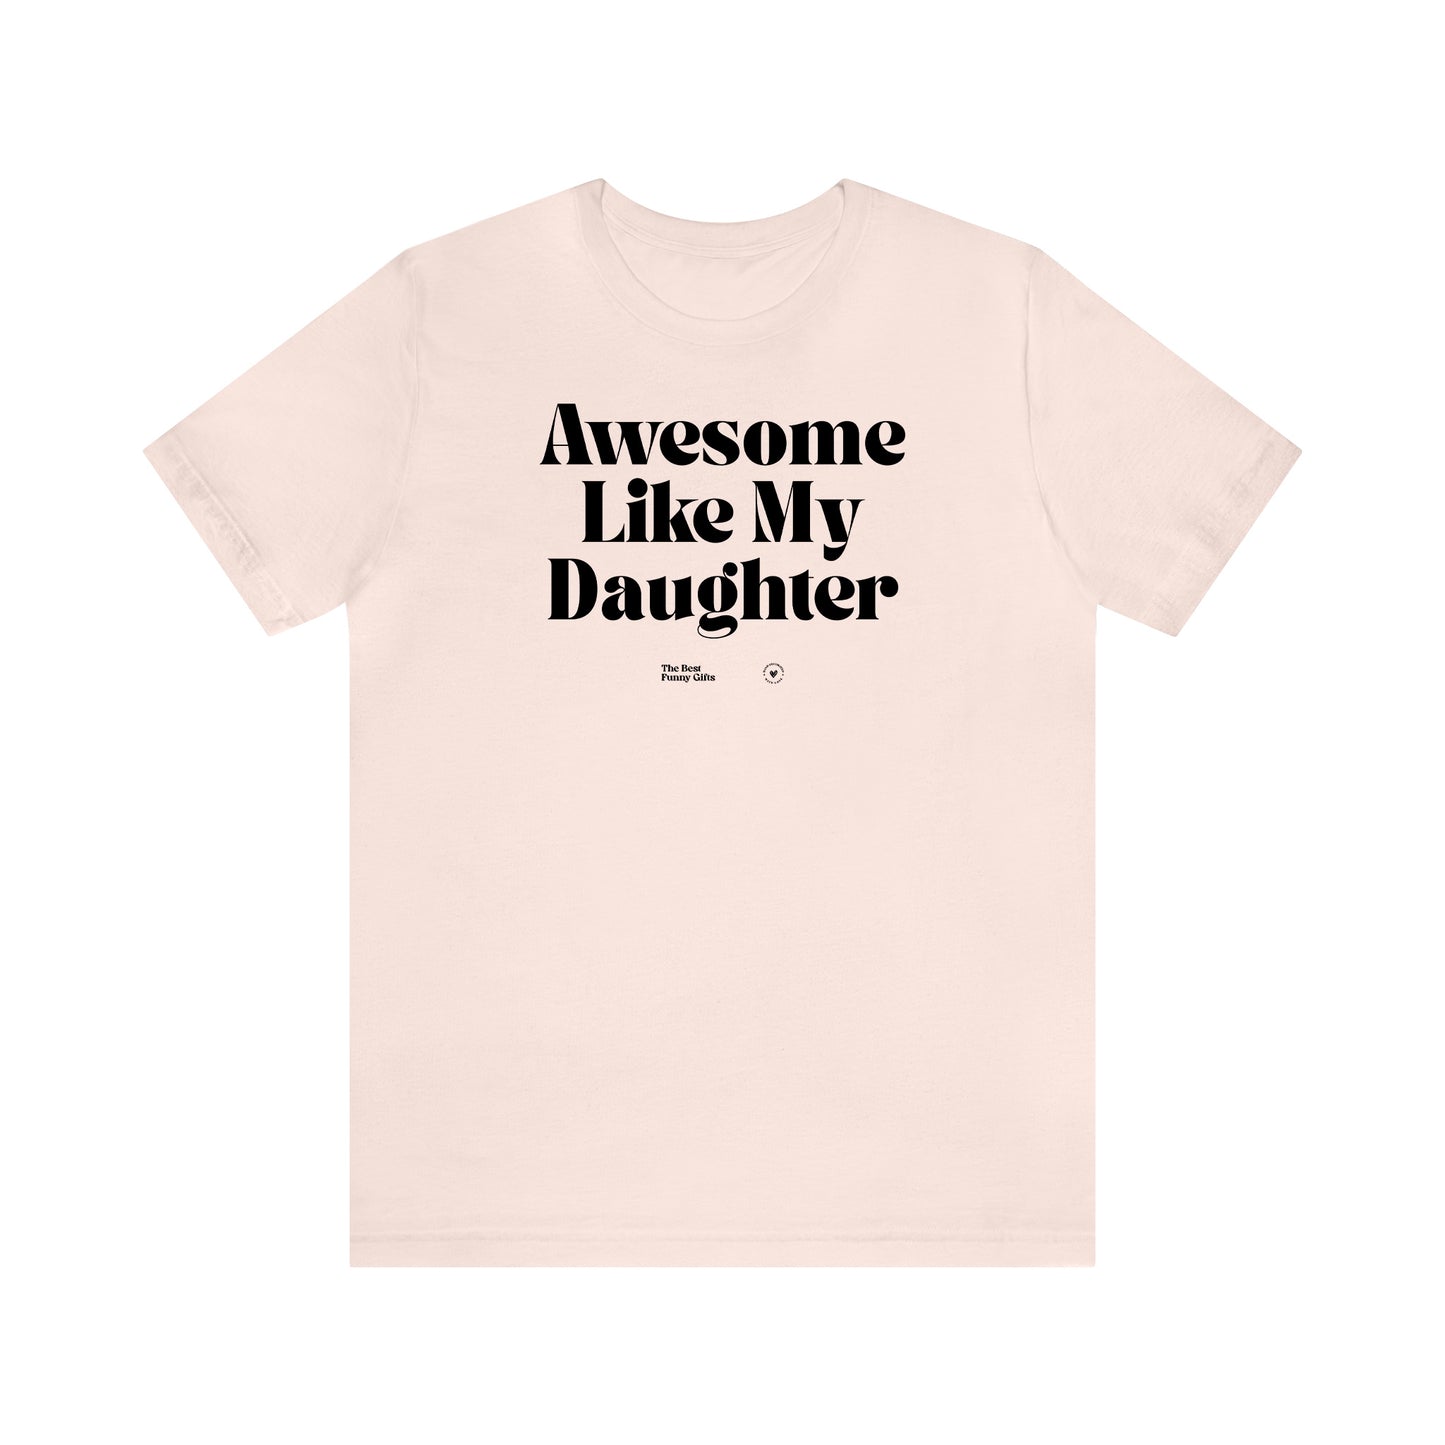 Funny Shirts for Women - Awesome Like My Daughter - Women’s T Shirts